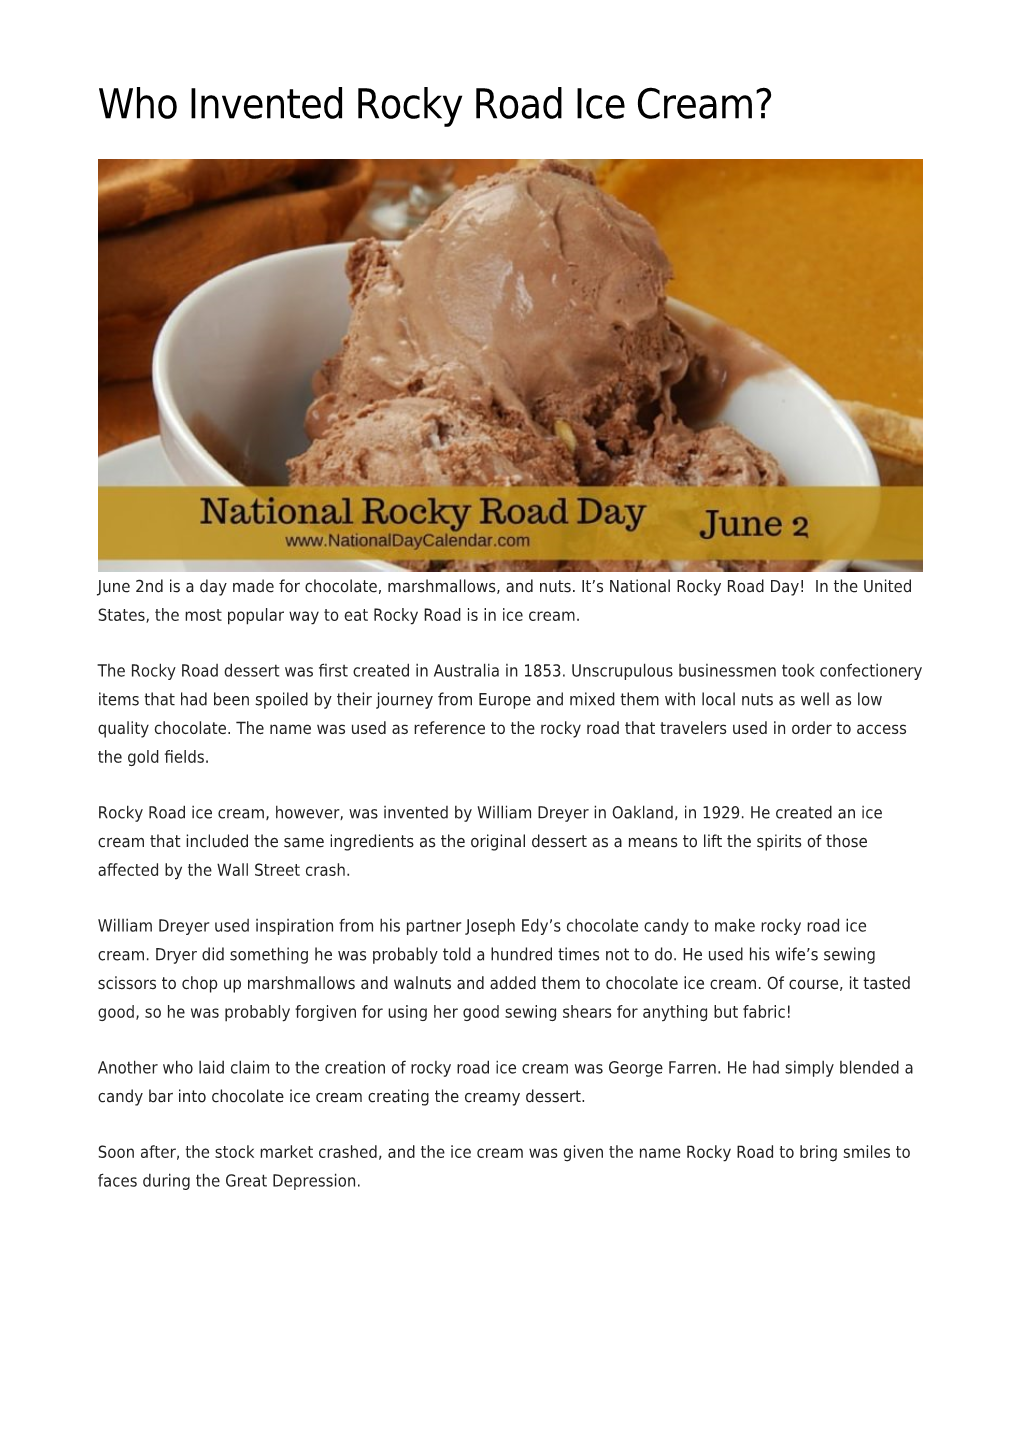 Who Invented Rocky Road Ice Cream?